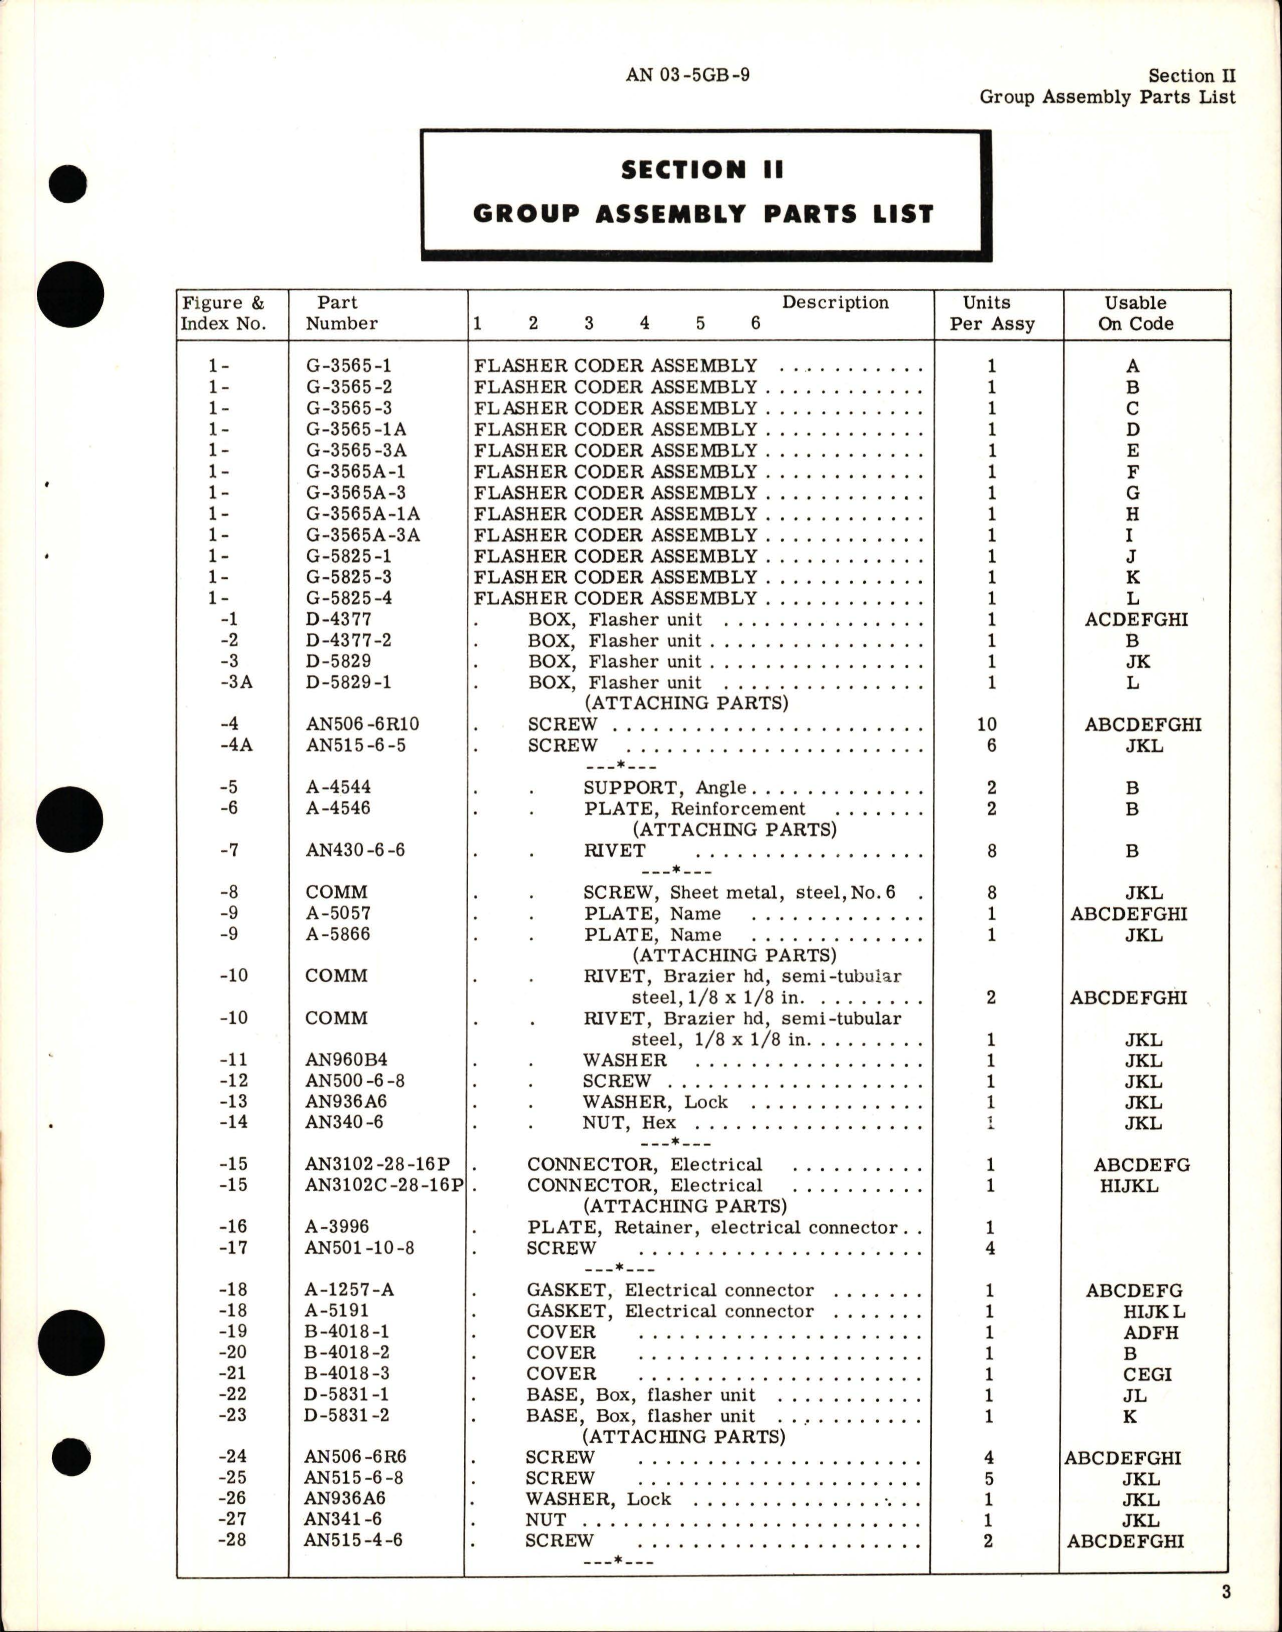 Sample page 7 from AirCorps Library document: Illustrated Parts Breadown for Flasher Coder Assembly 